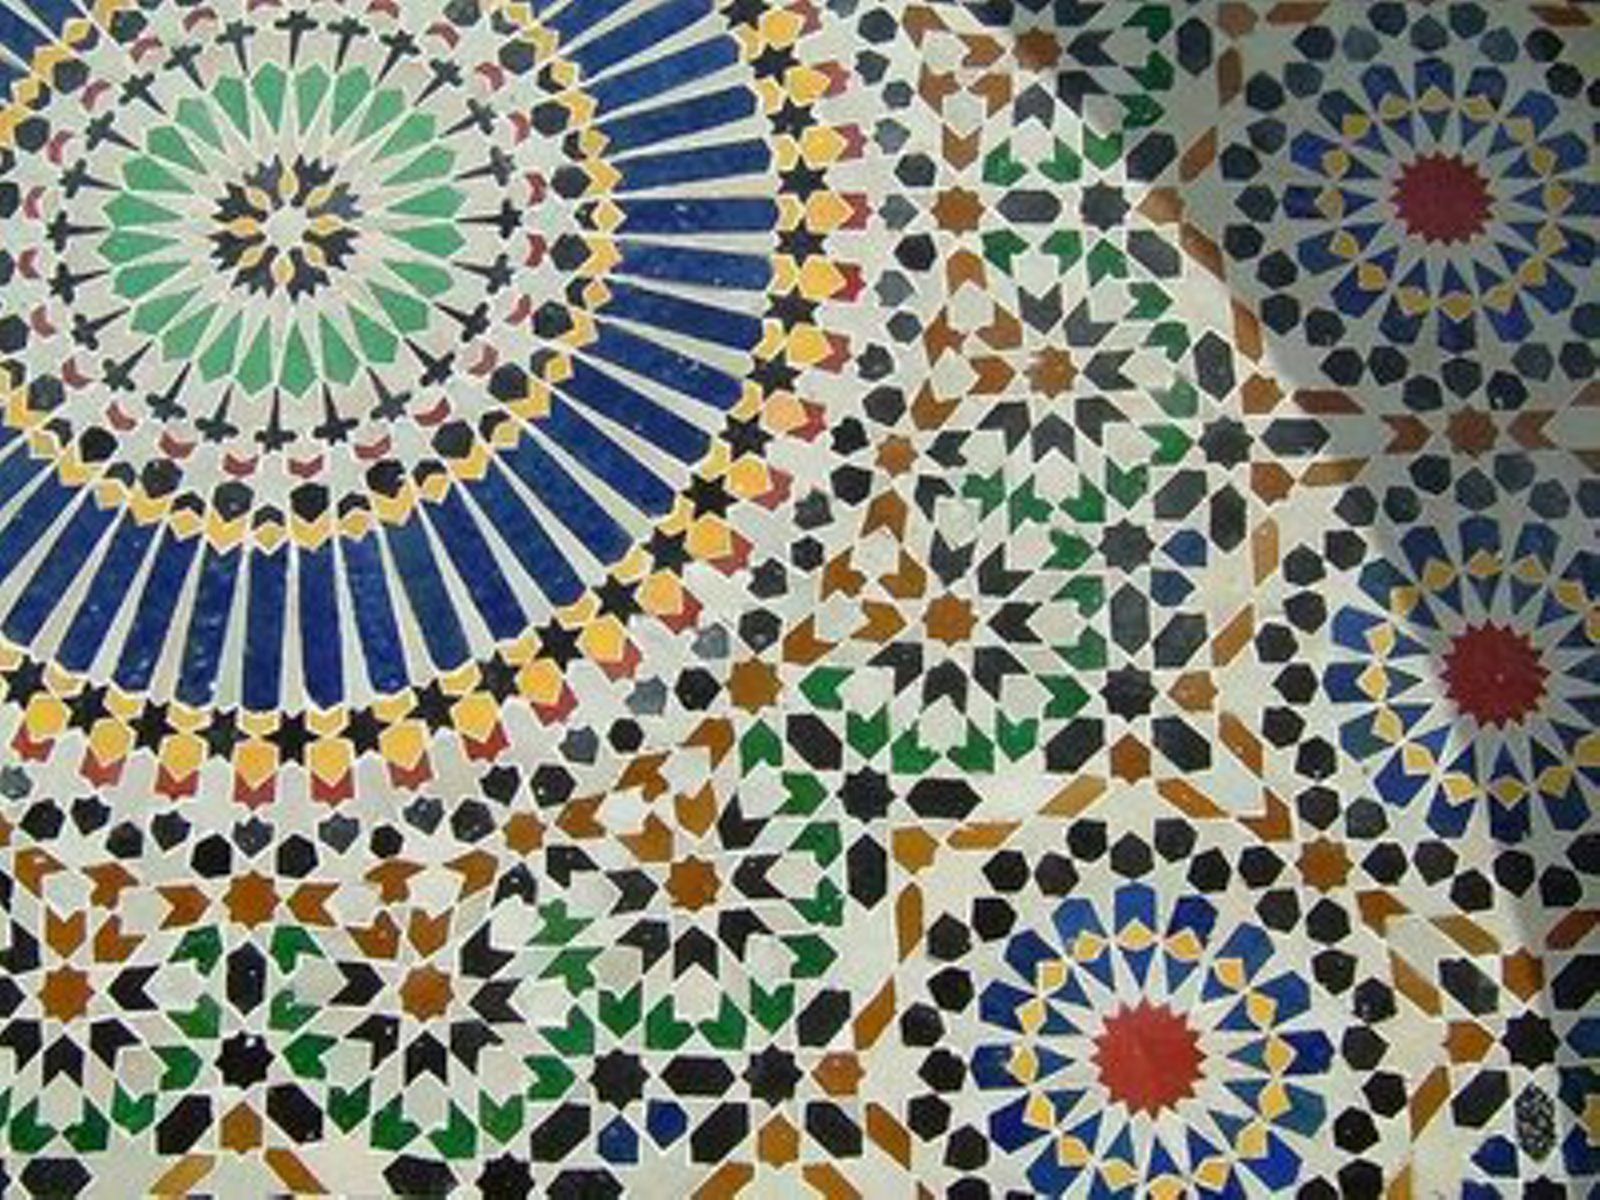 Moroccan Inspired Wallpaper. Moroccan Inspired Wallpaper, Moroccan Inspired Wallpaper Borders And Moroccan Inspired Wallpaper Multicolor